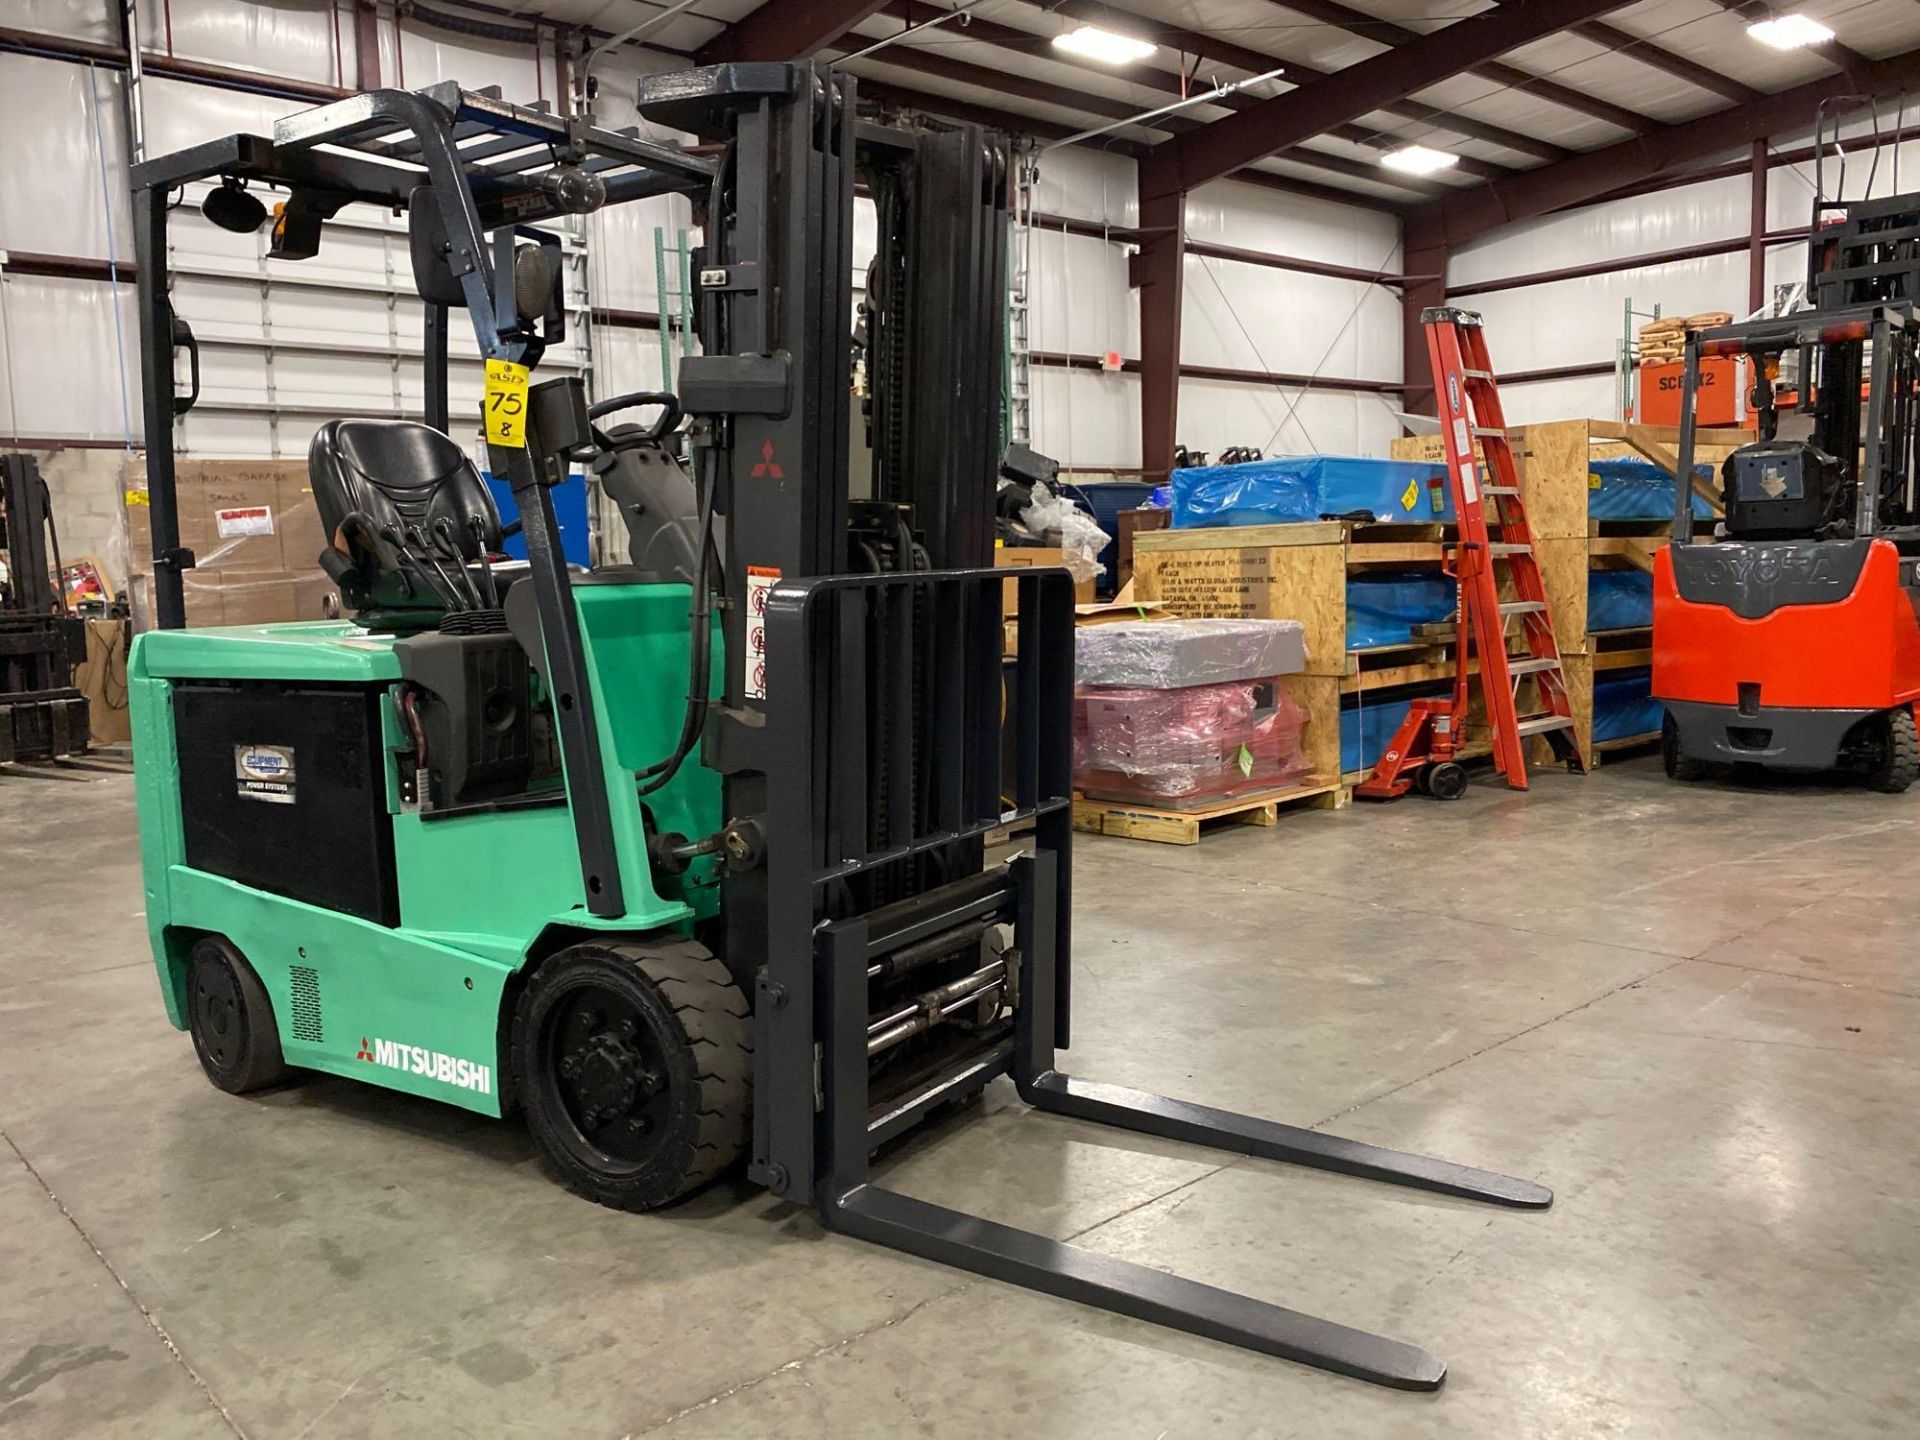 2016 MITSUBISHI FBC25N2 ELECTRIC FORKLIFT, APPROX. 4,500 LB CAPACITY - Image 2 of 12